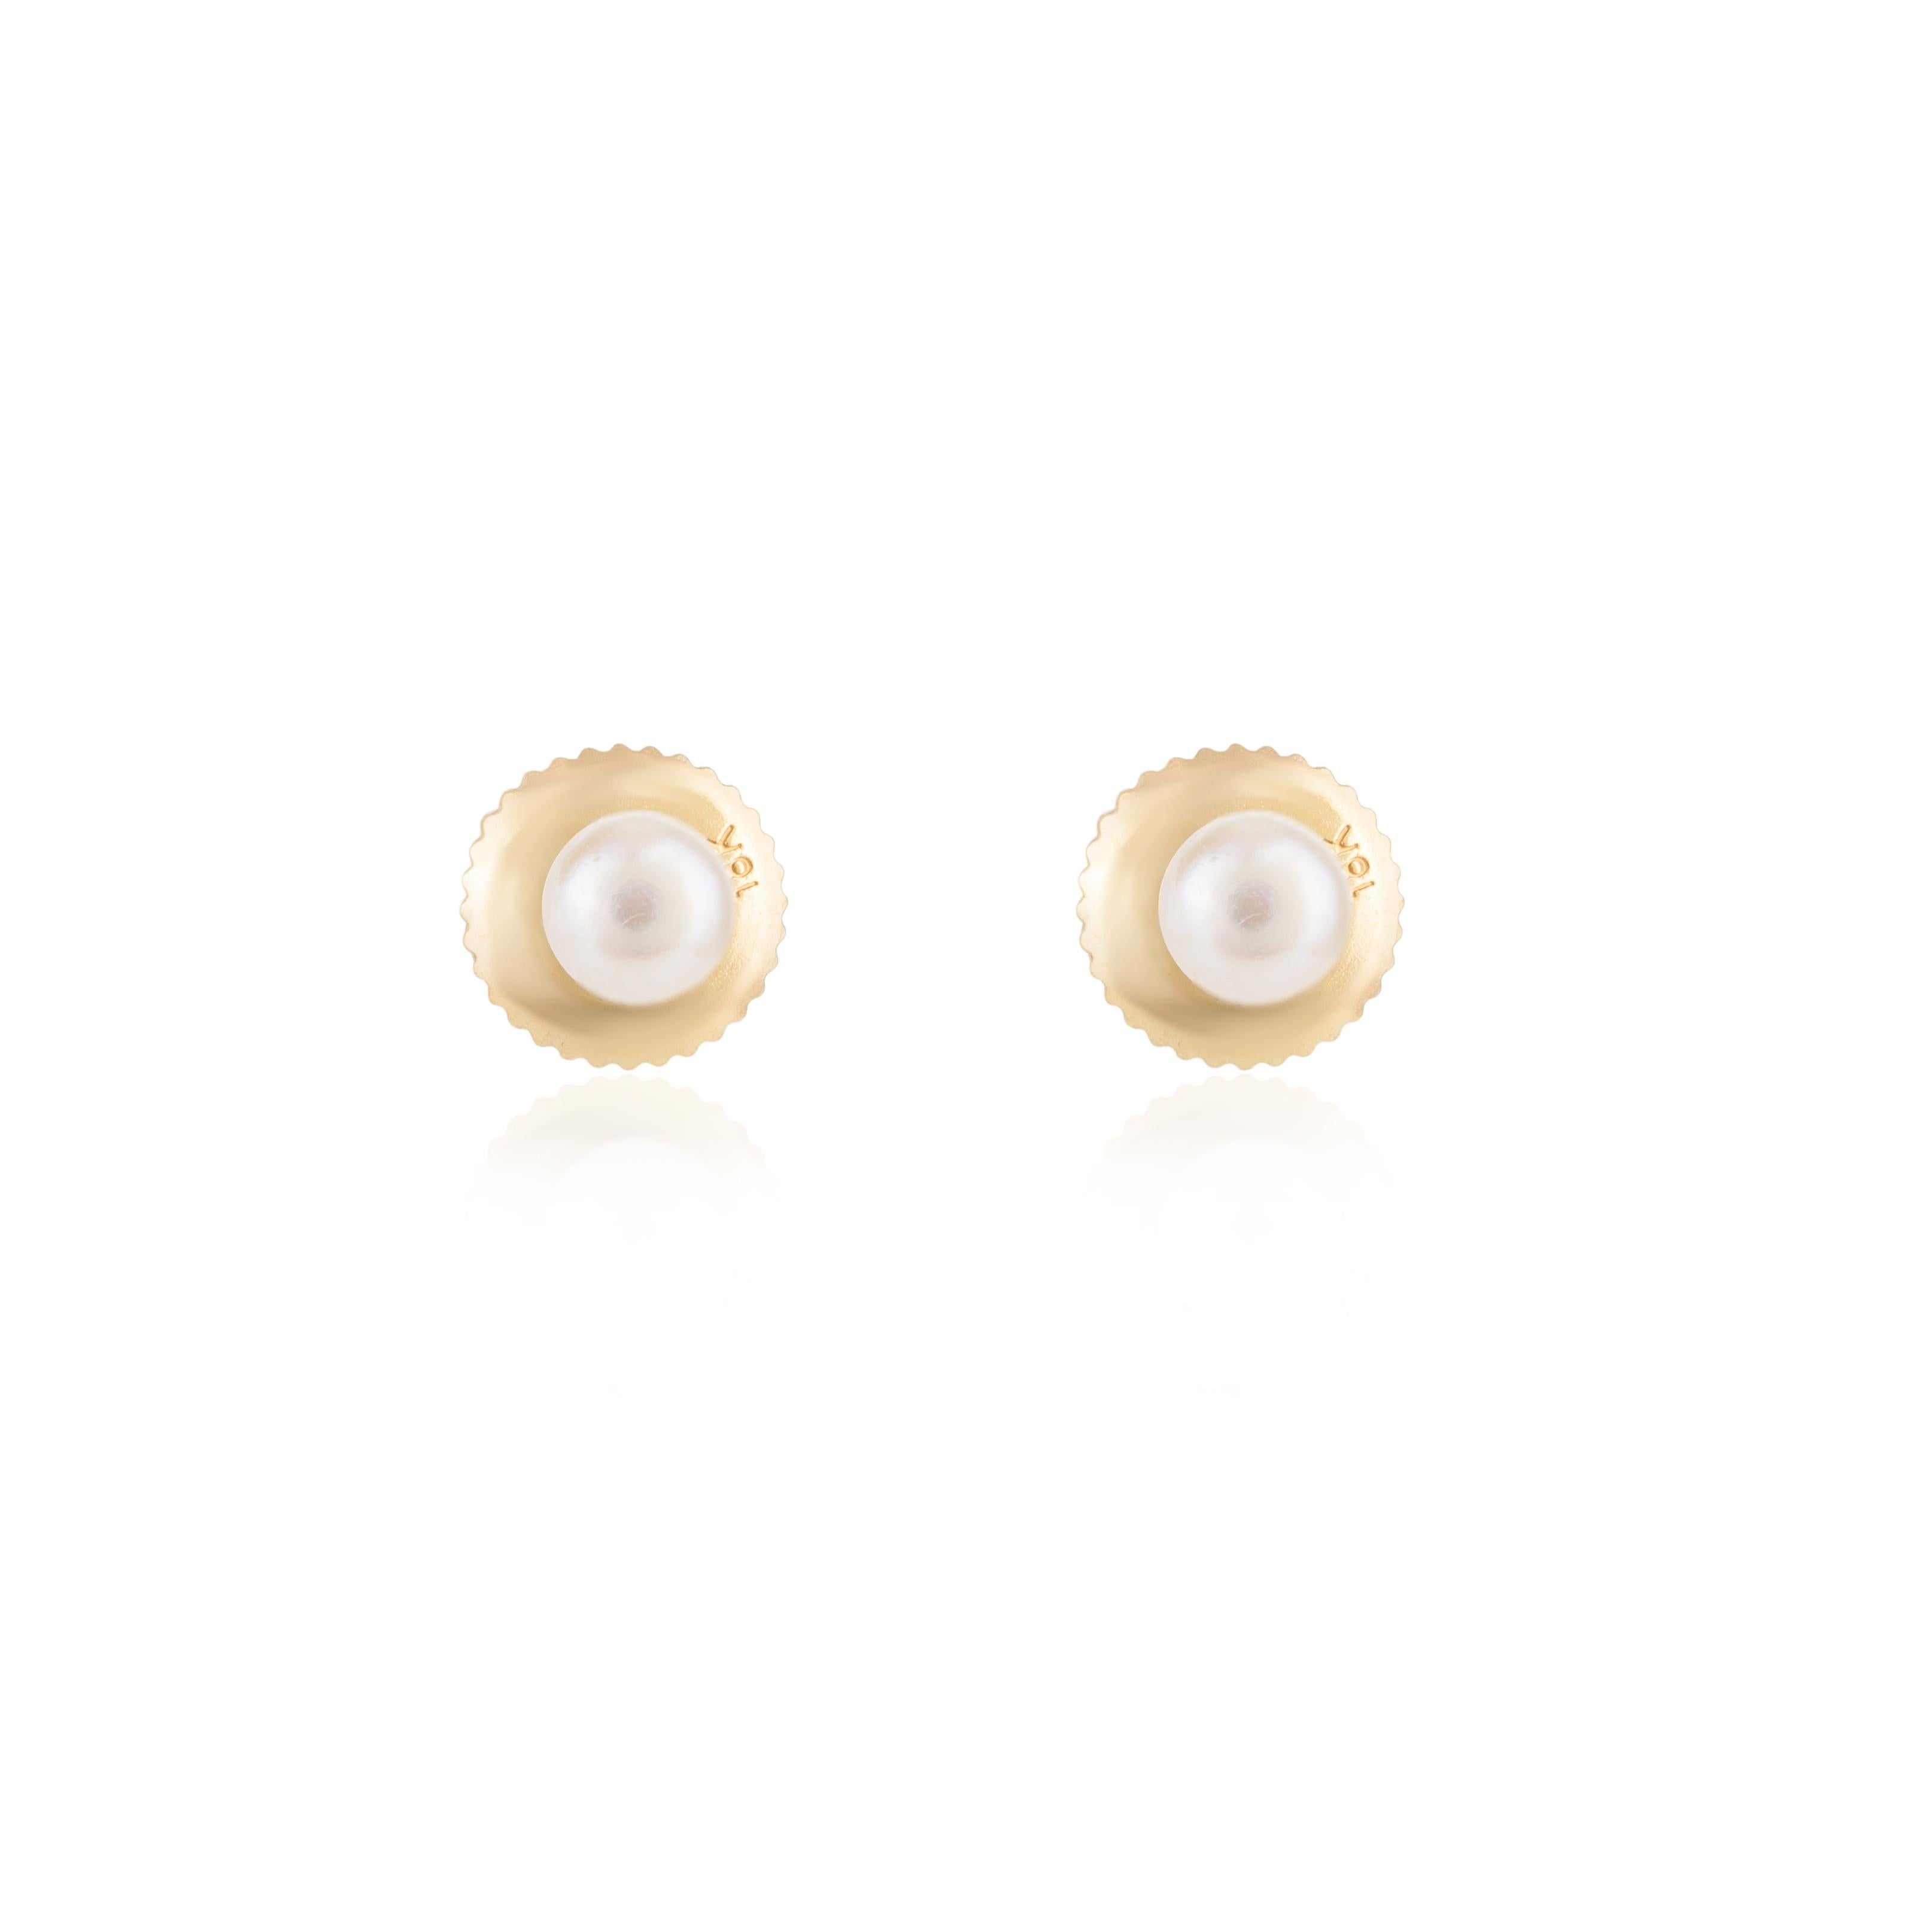 Round Cut Dainty Everyday Pearl Stud Earrings in 18k Solid Yellow Gold Minimalist Jewelry For Sale